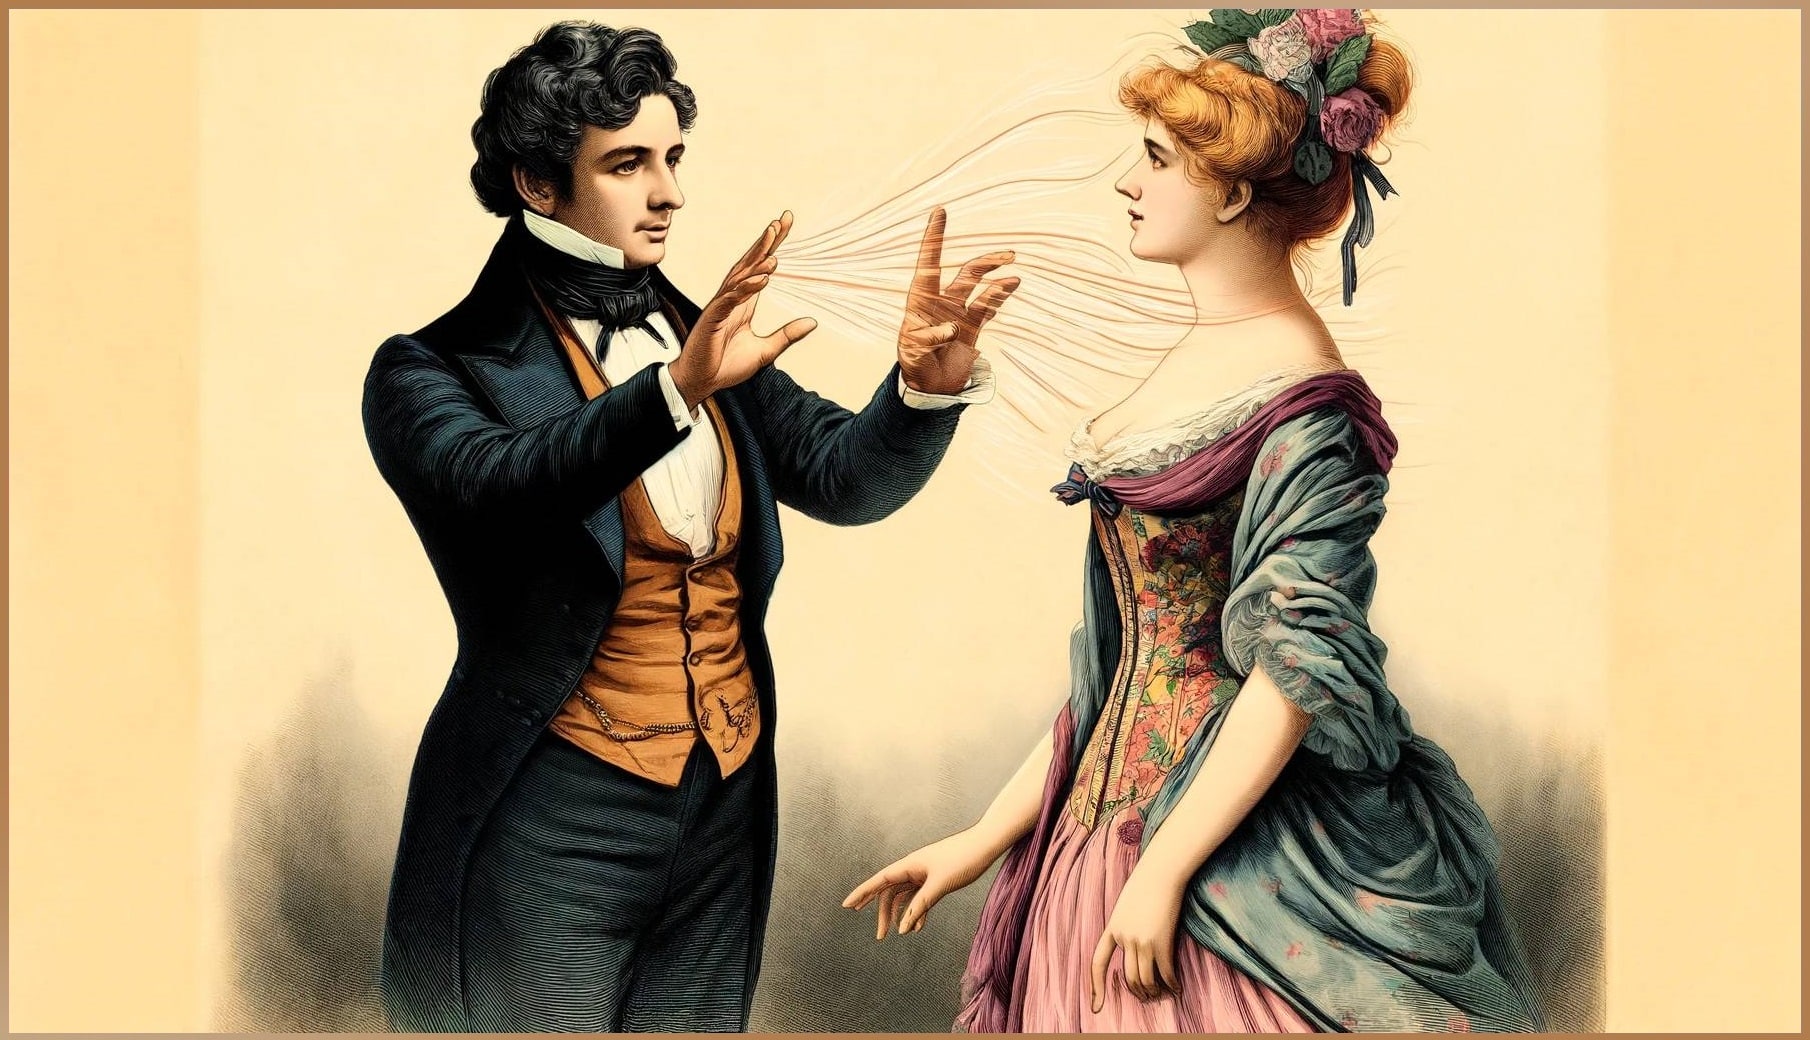 Vintage illustration depicting Franz Anton Mesmer performing magnetic treatment on a woman; they stand facing each other with streams of energy illustrated between their outstretched hands, reflecting the concept of 'fluidum'.